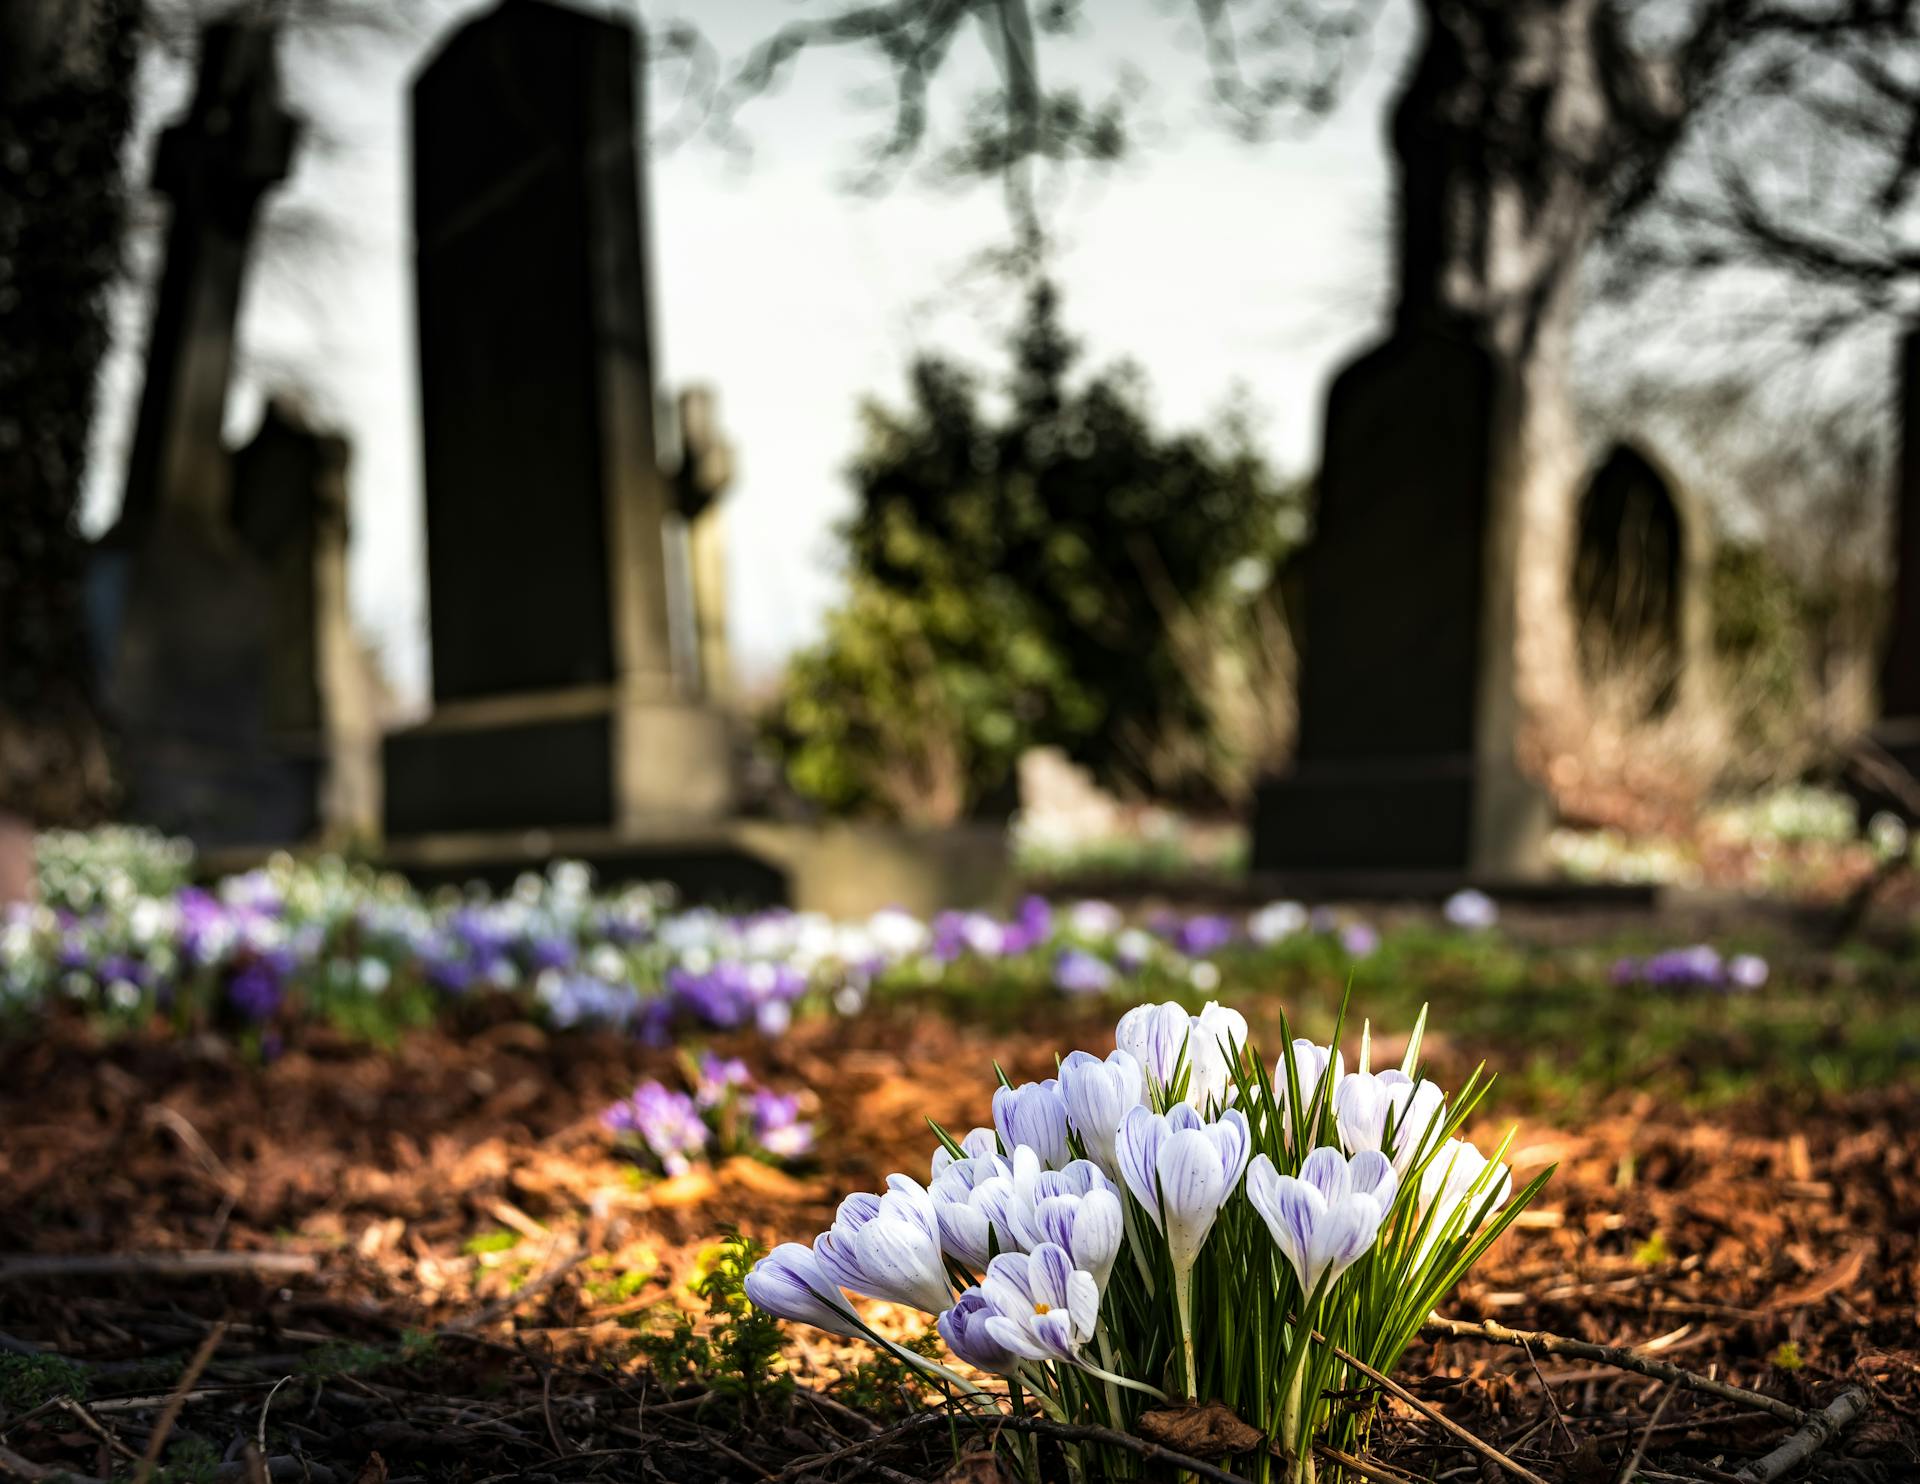 A graveyard with flowers | Source: Pexels